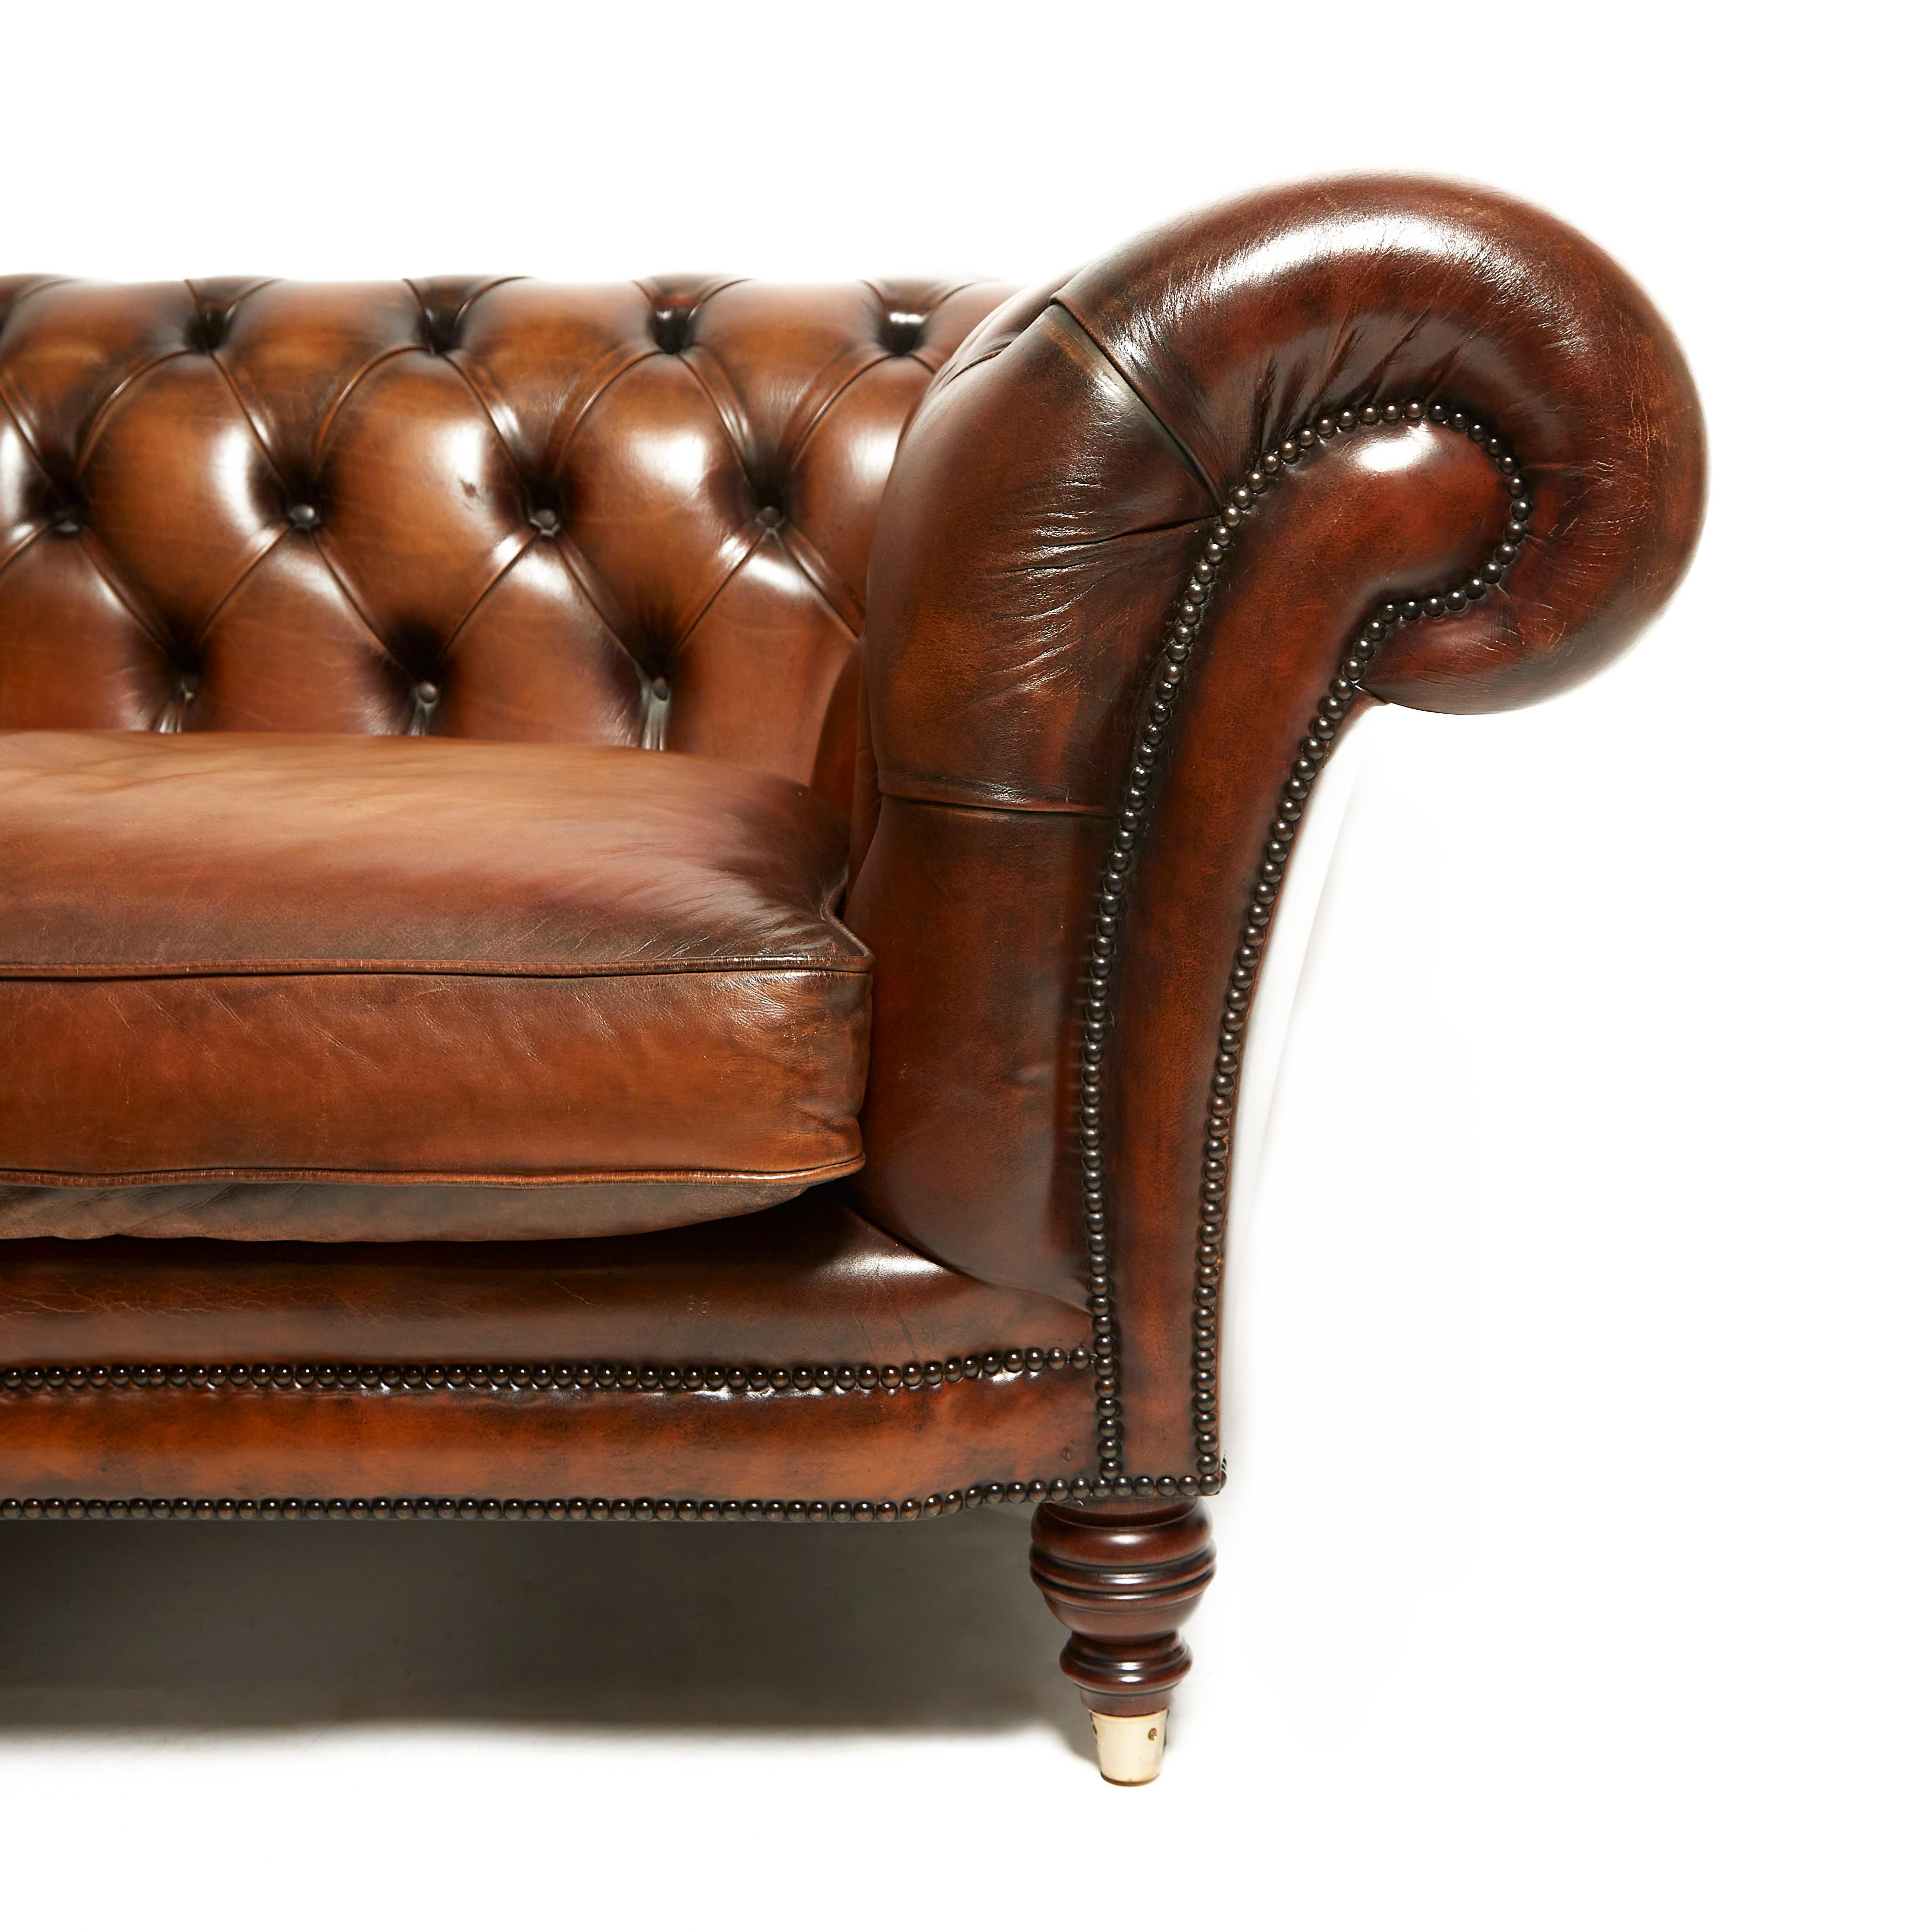 sofa chesterfield sales